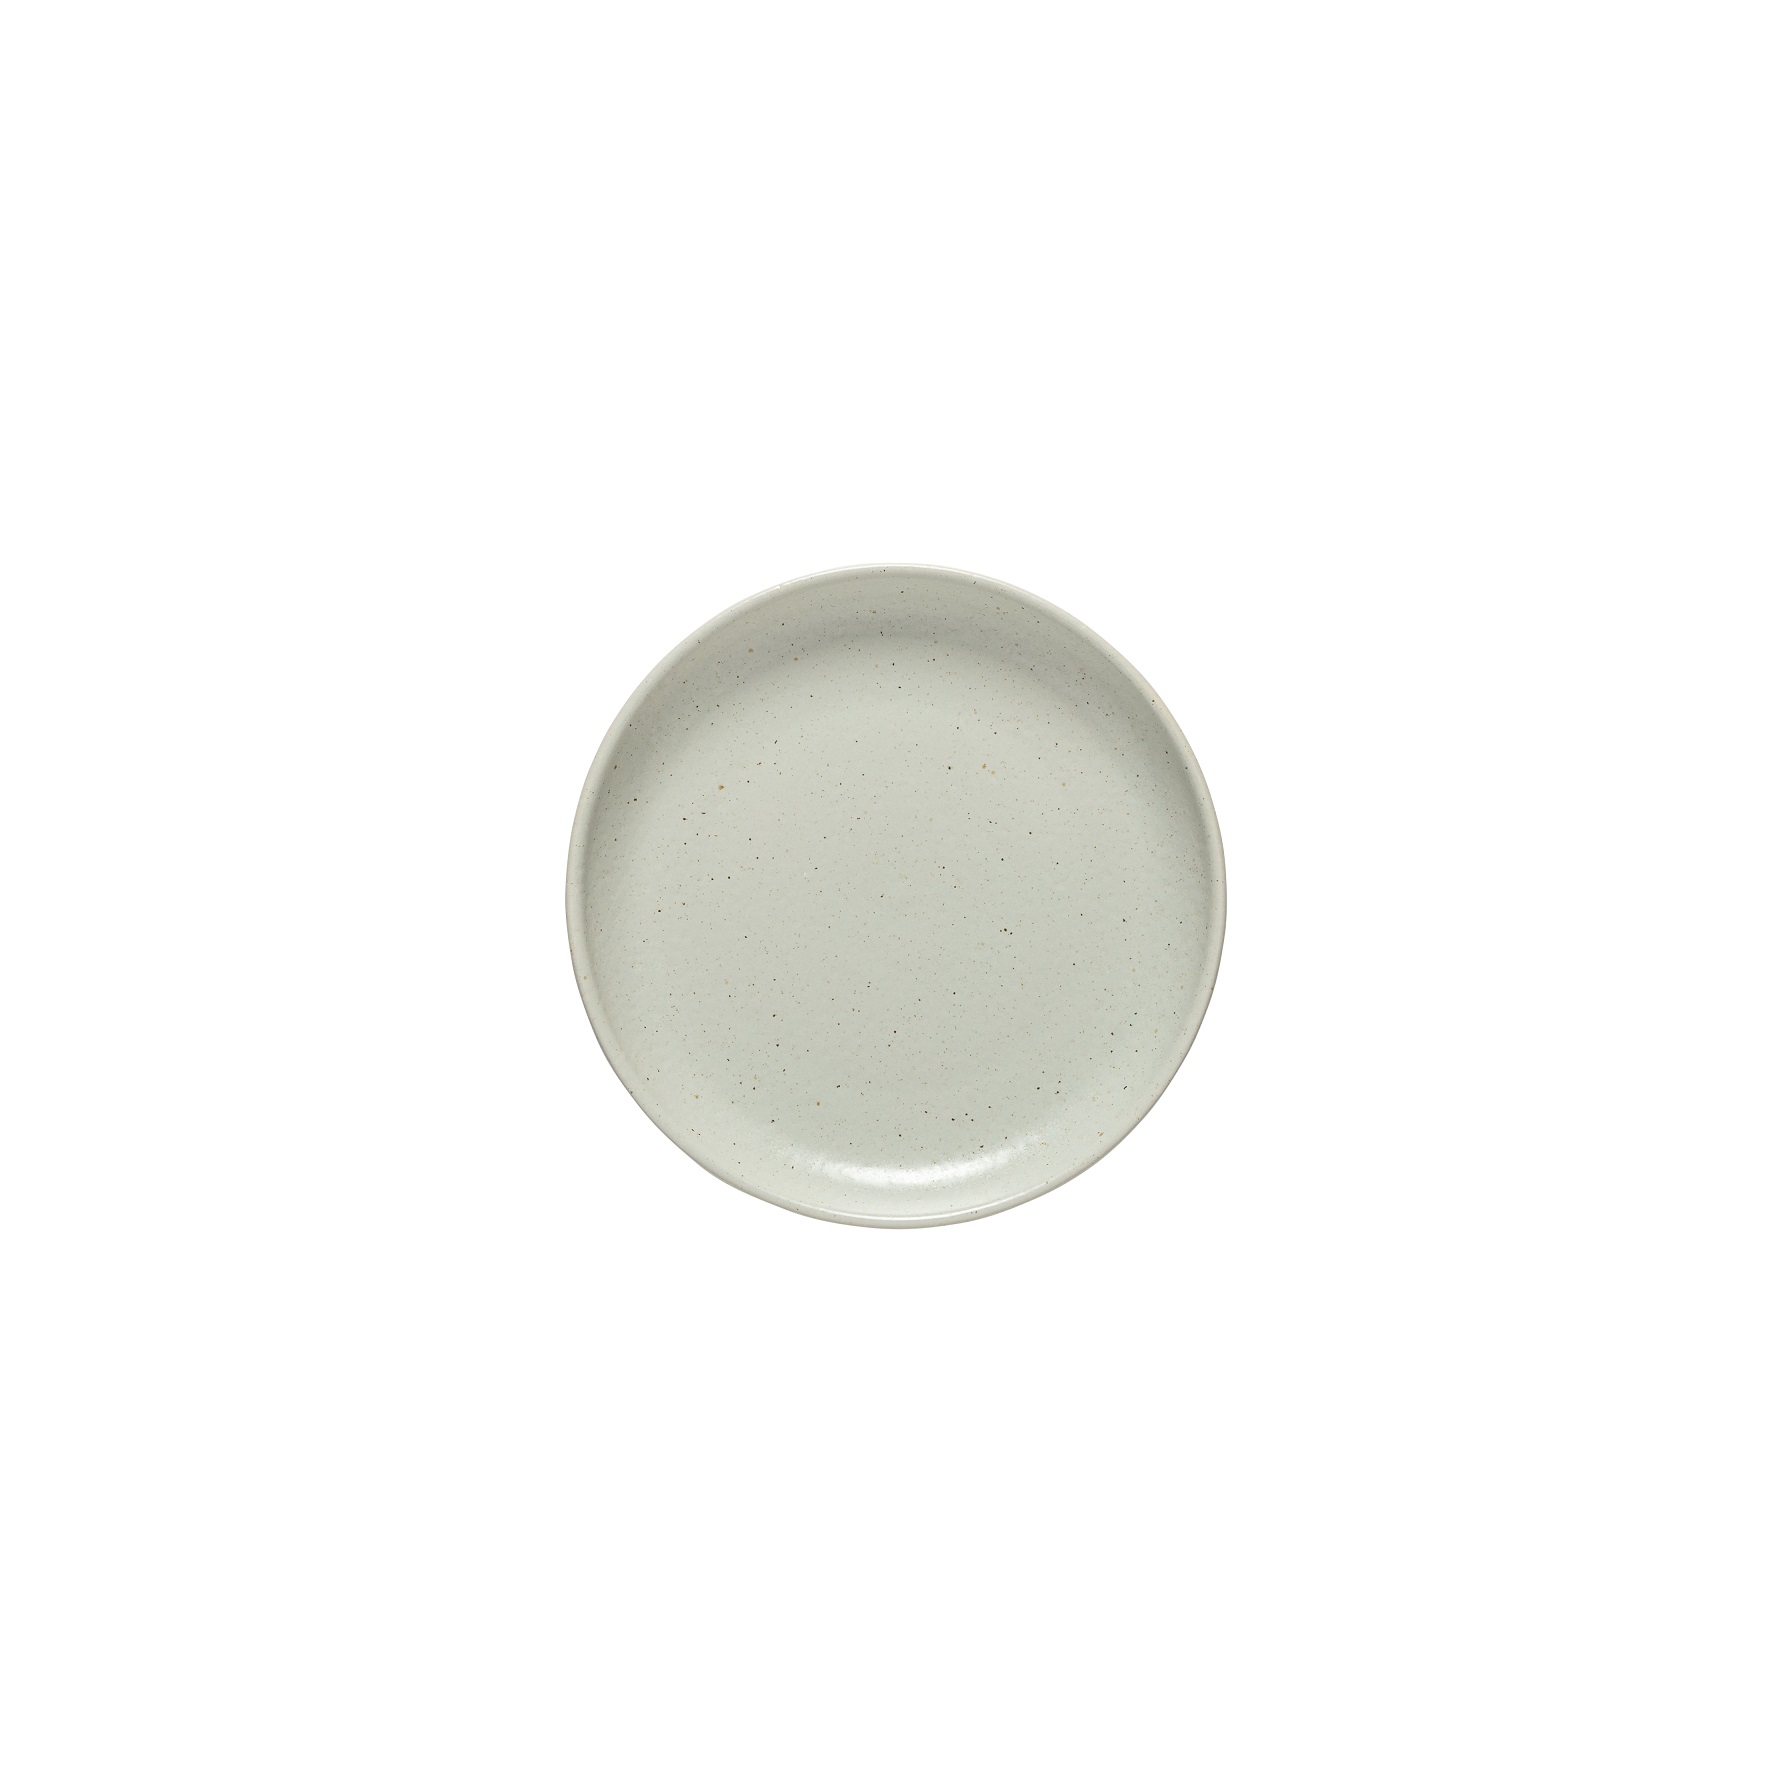 Pacifica Oyster Grey Bread Plate 16cm Gift